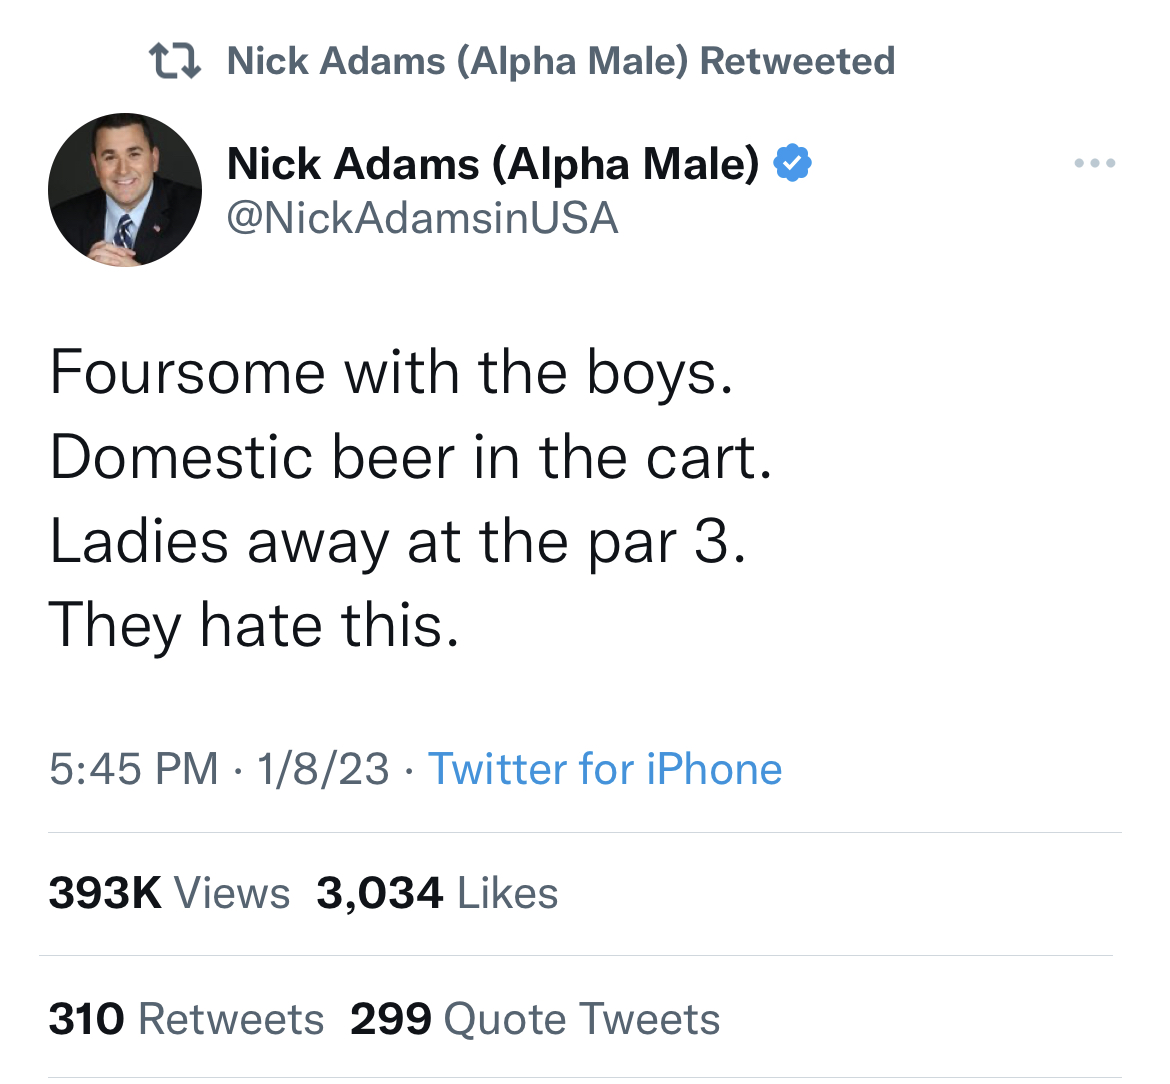 nick adams unhinged tweets - angle - t Nick Adams Alpha Male Retweeted Nick Adams Alpha Male Usa Foursome with the boys. Domestic beer in the cart. Ladies away at the par 3. They hate this. 1823 Twitter for iPhone Views 3,034 310 299 Quote Tweets